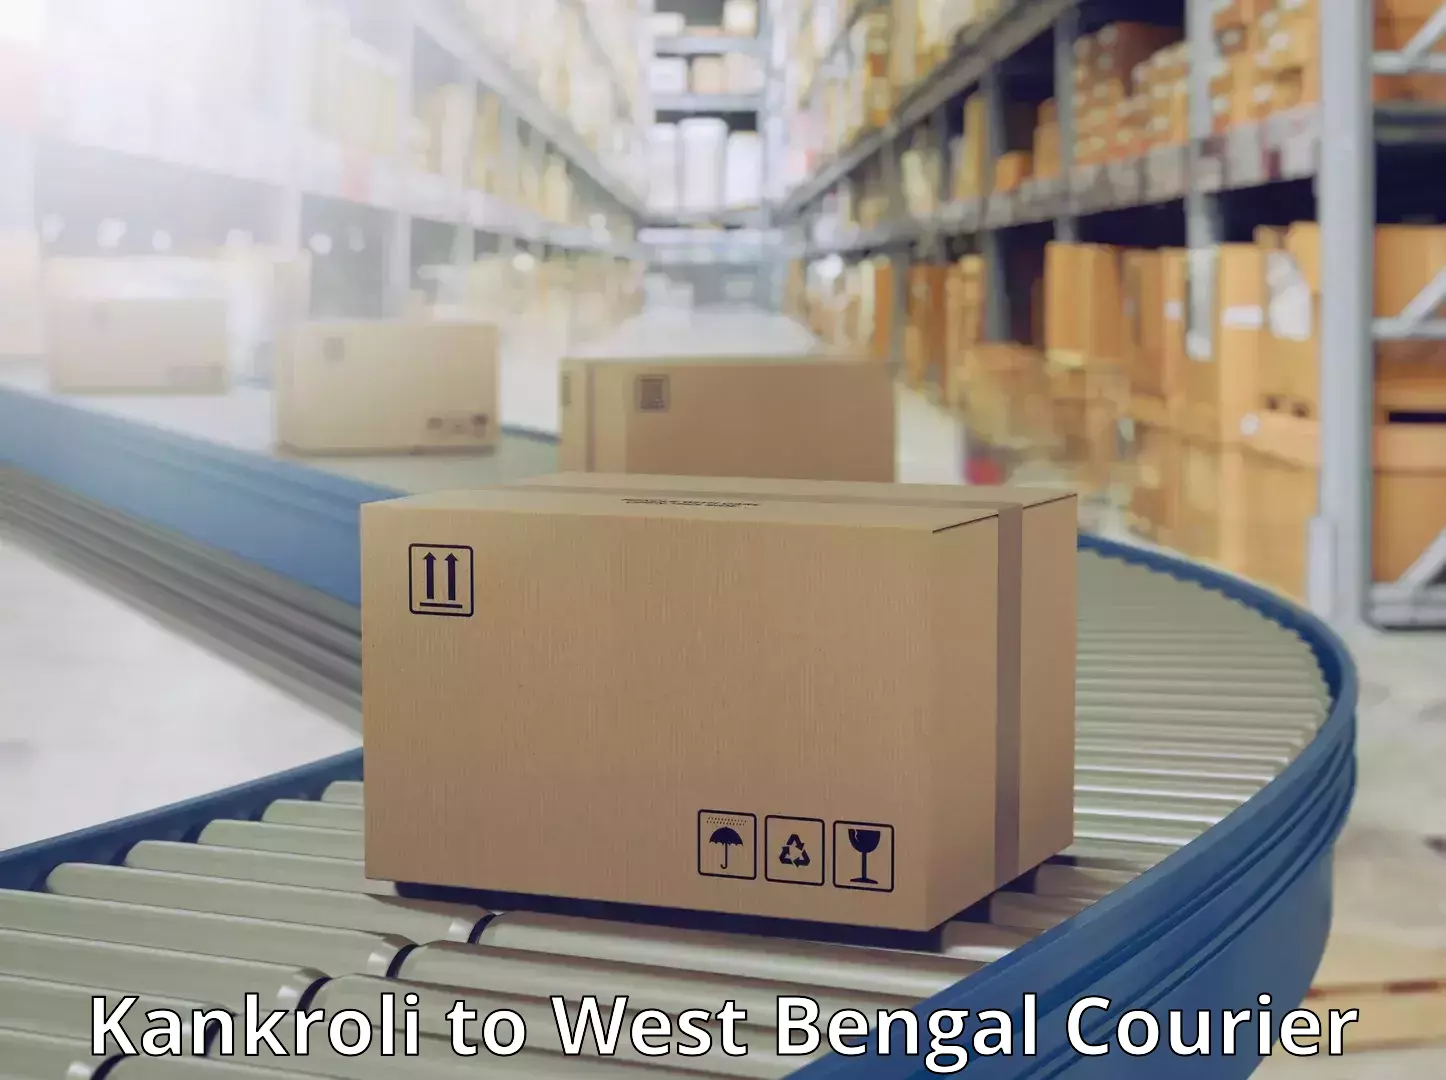 Modern delivery technologies Kankroli to West Bengal